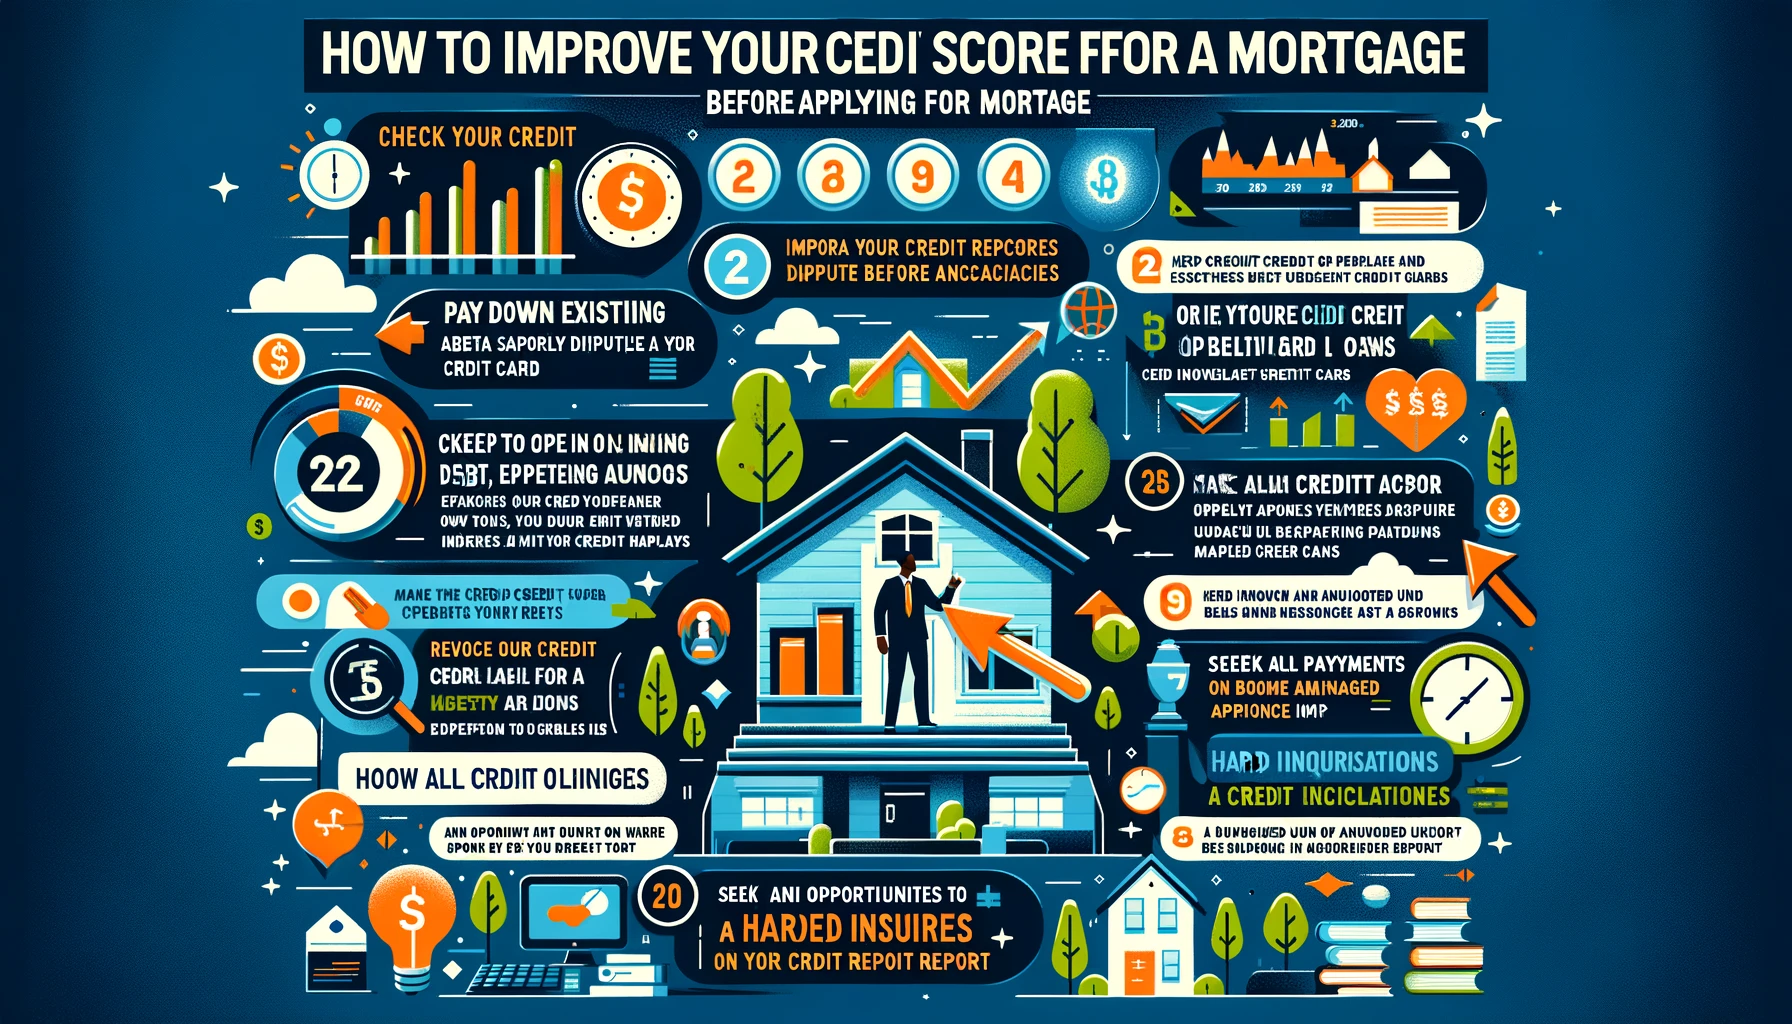 How to Improve Your Credit Score Before Applying for a Mortgage